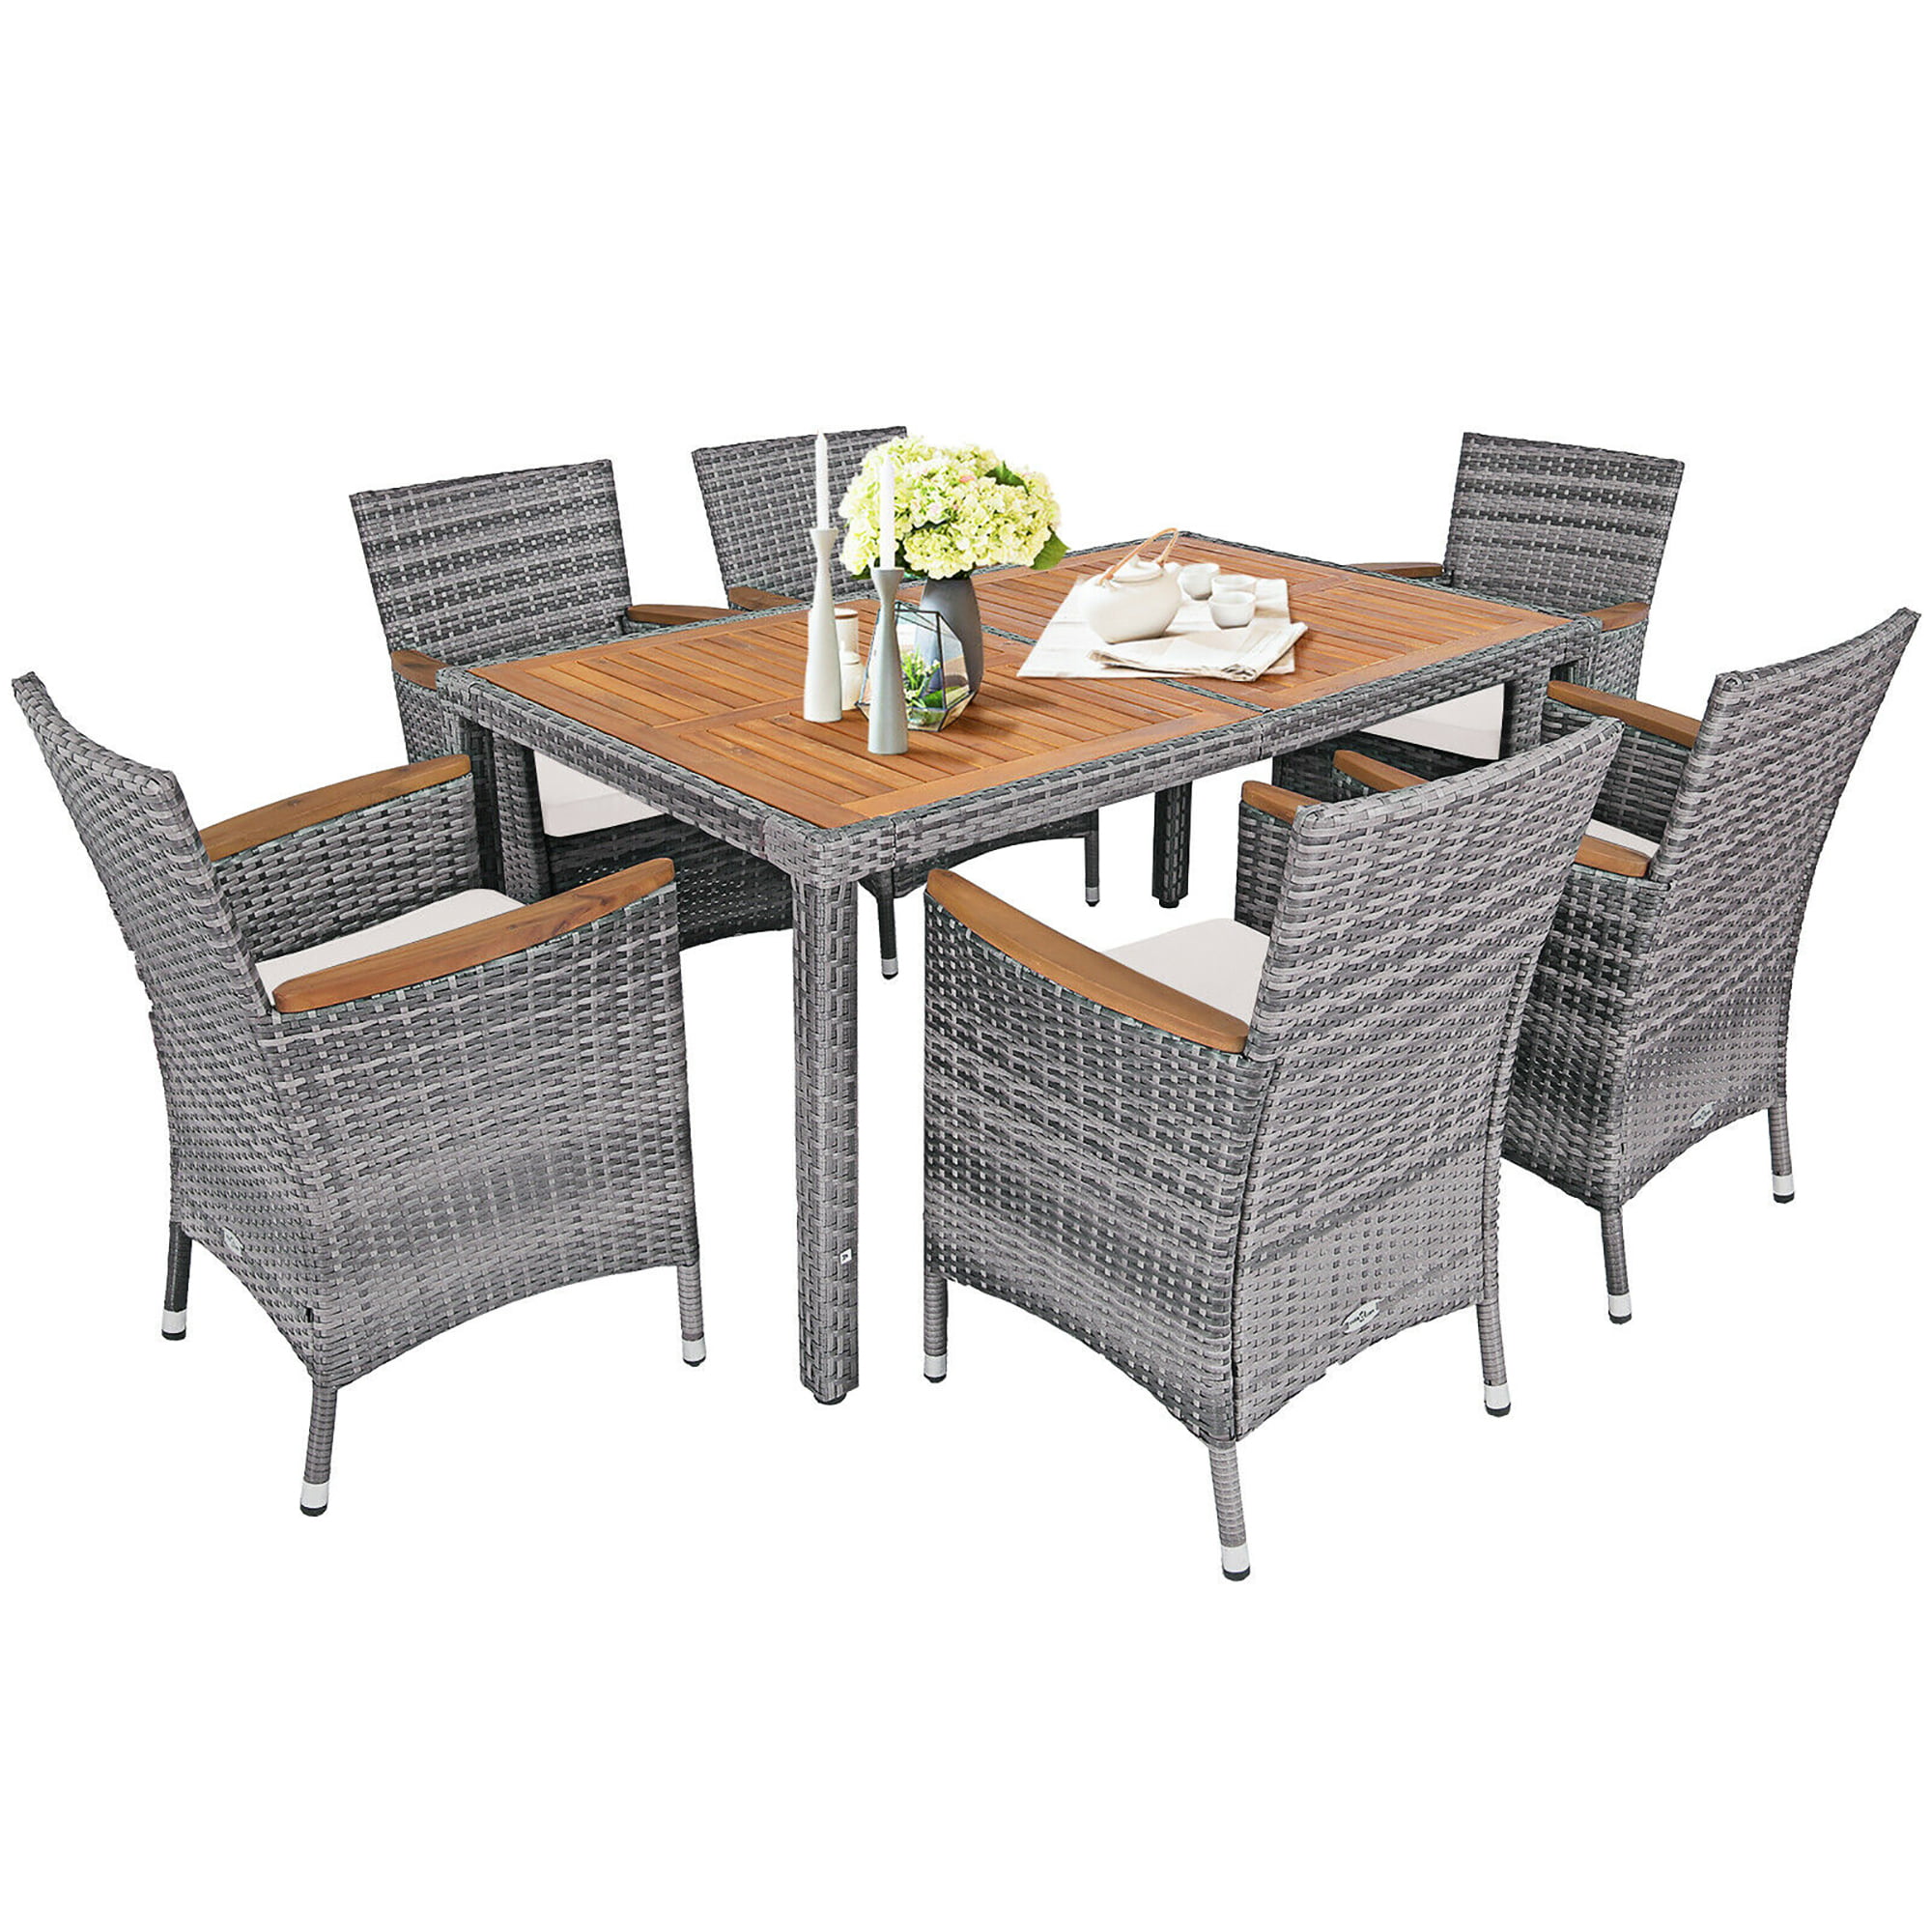 Suitable for Backyard Poolside Patio Rattan Conversation Set with Spacious Acacia Wood Table 6 Chairs with Widened Armrests Non-slip Foot Pads Tangkula 7 Pieces Outdoor Dining Furniture Set Grey 